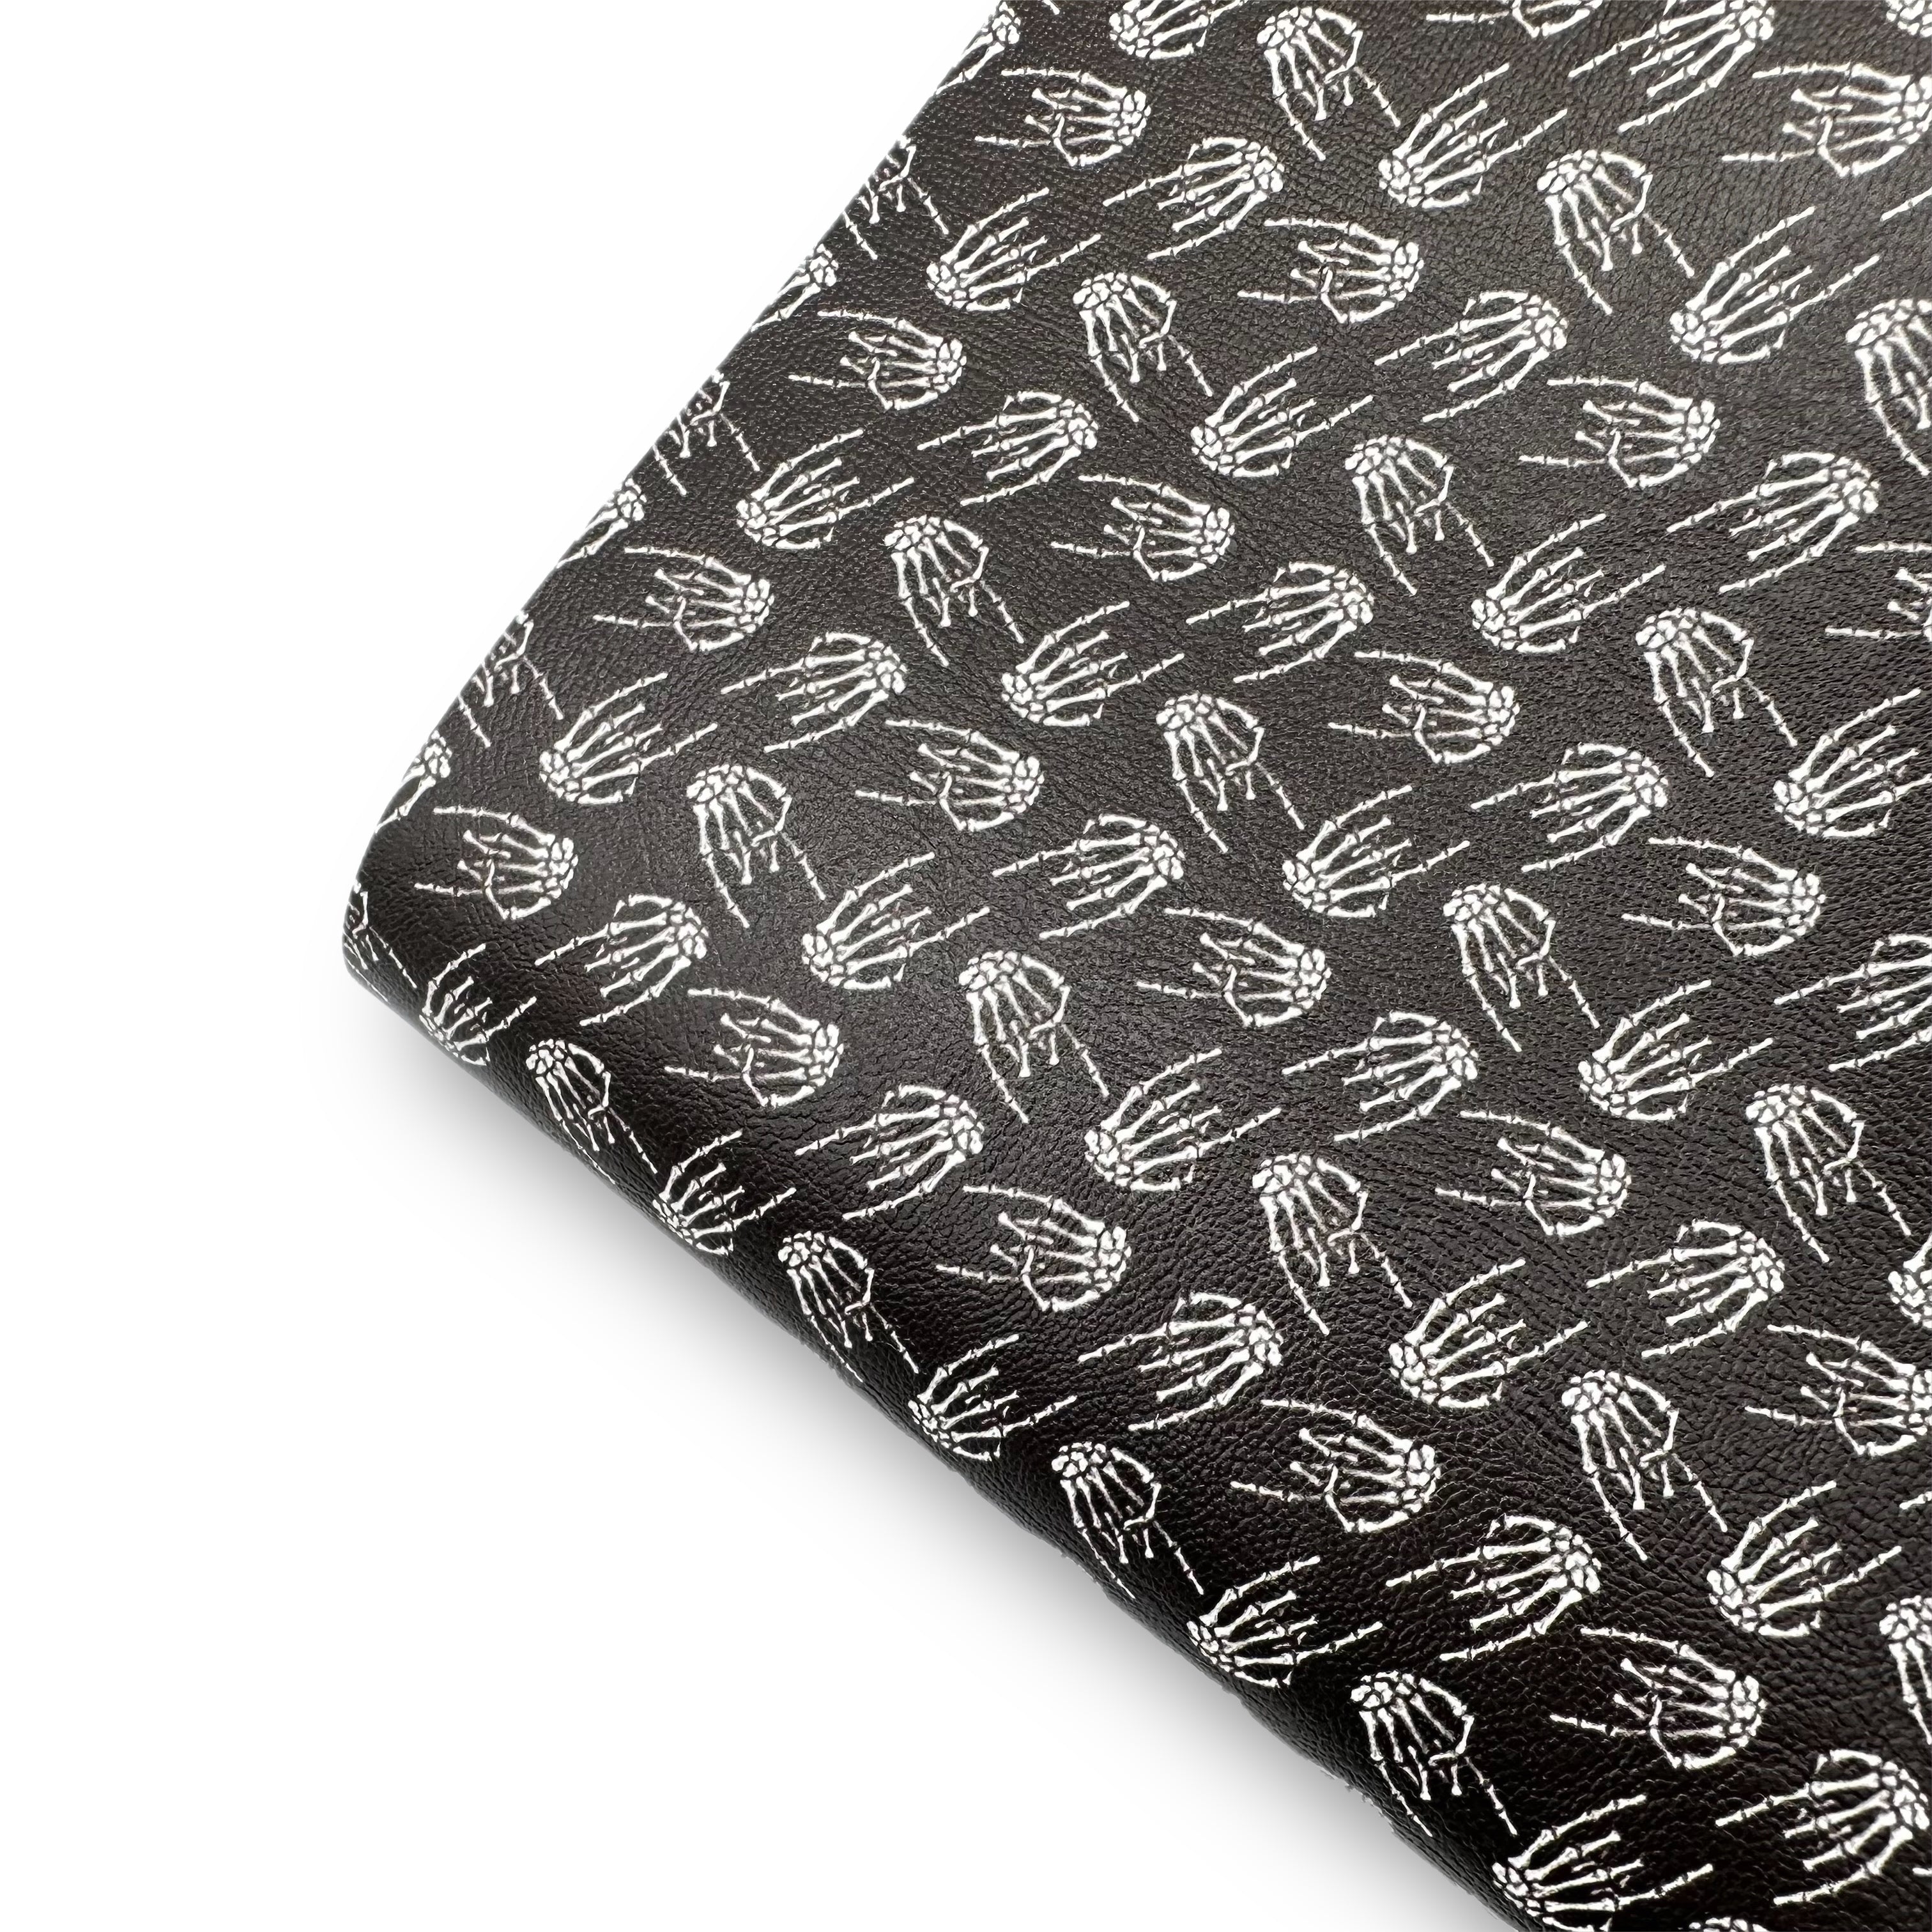 Skeleton Hands Premium Faux Leather Fabric Sheets